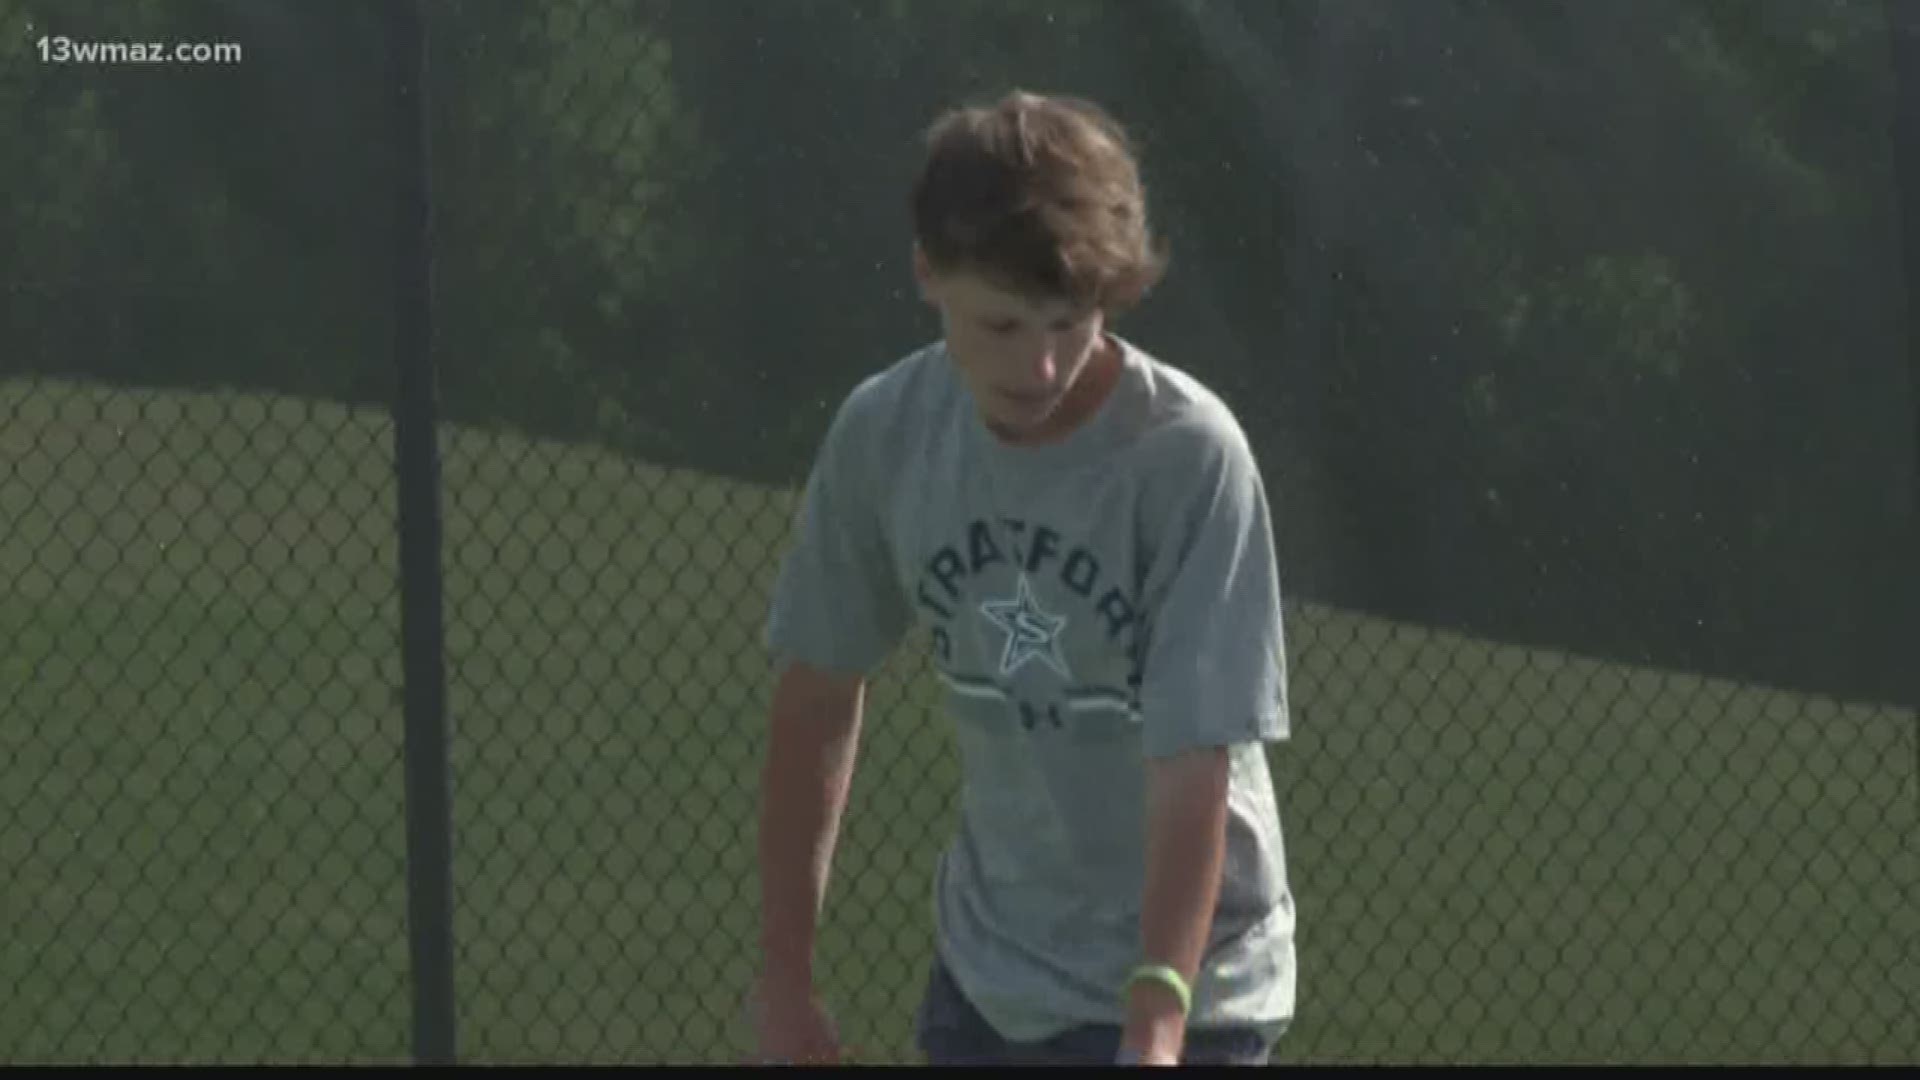 Will Fackler is a sophomore tennis player for the Stratford tennis team and he's our Athlete of the Week!